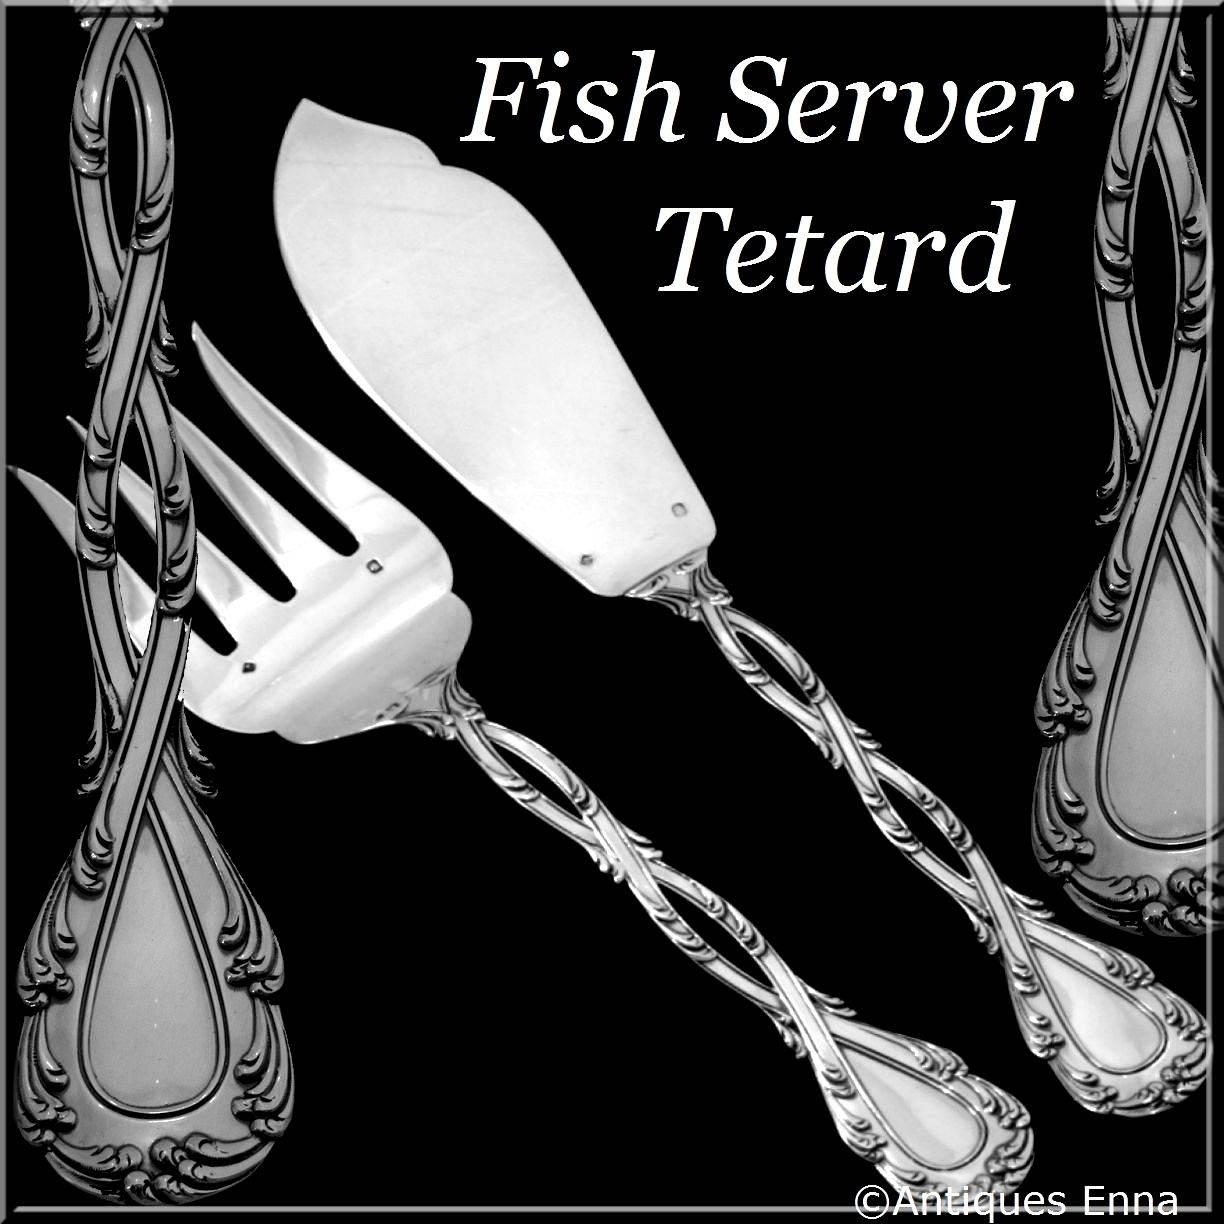 Rare Odiot Tetard French All Sterling Silver Fish Servers 2 pc Trianon pattern

Head of Minerve 1 st titre for 925/1000 French Sterling Silver guarantee

Masterpiece of lightness, delicacy and refinement, this covered naturalist, surprisingly